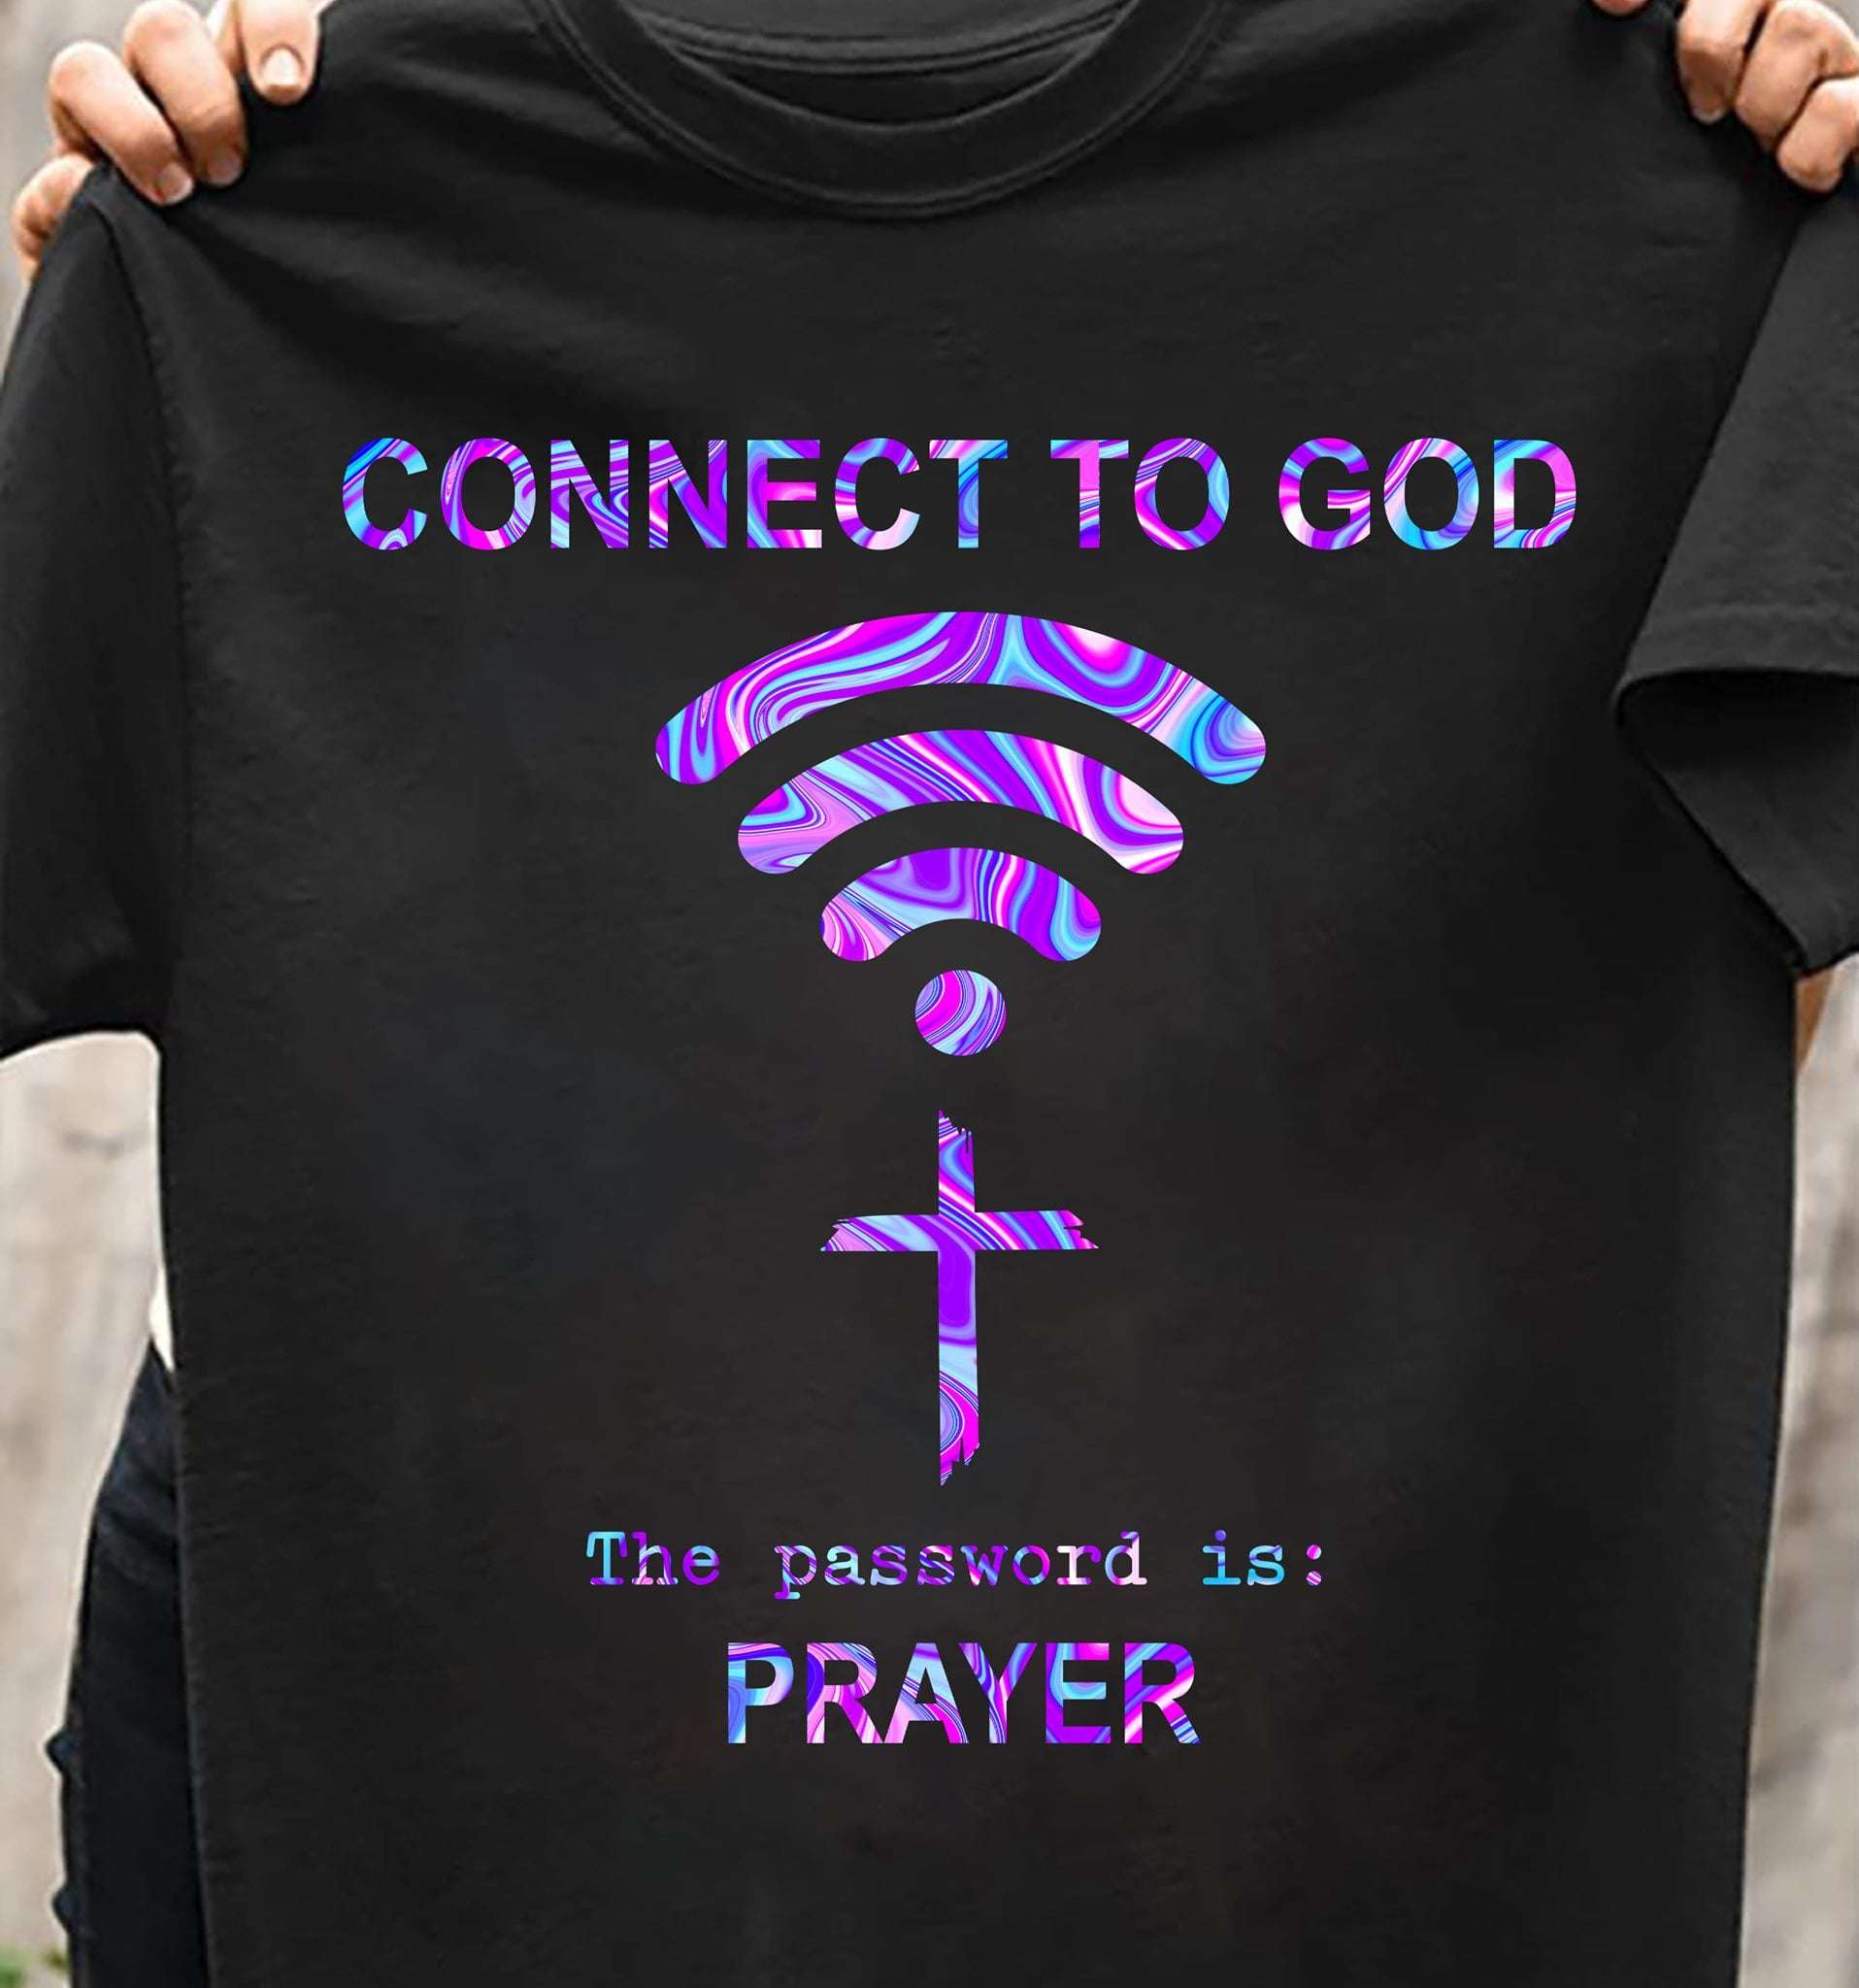 Connect to god - The password is prayer, wifi password connection